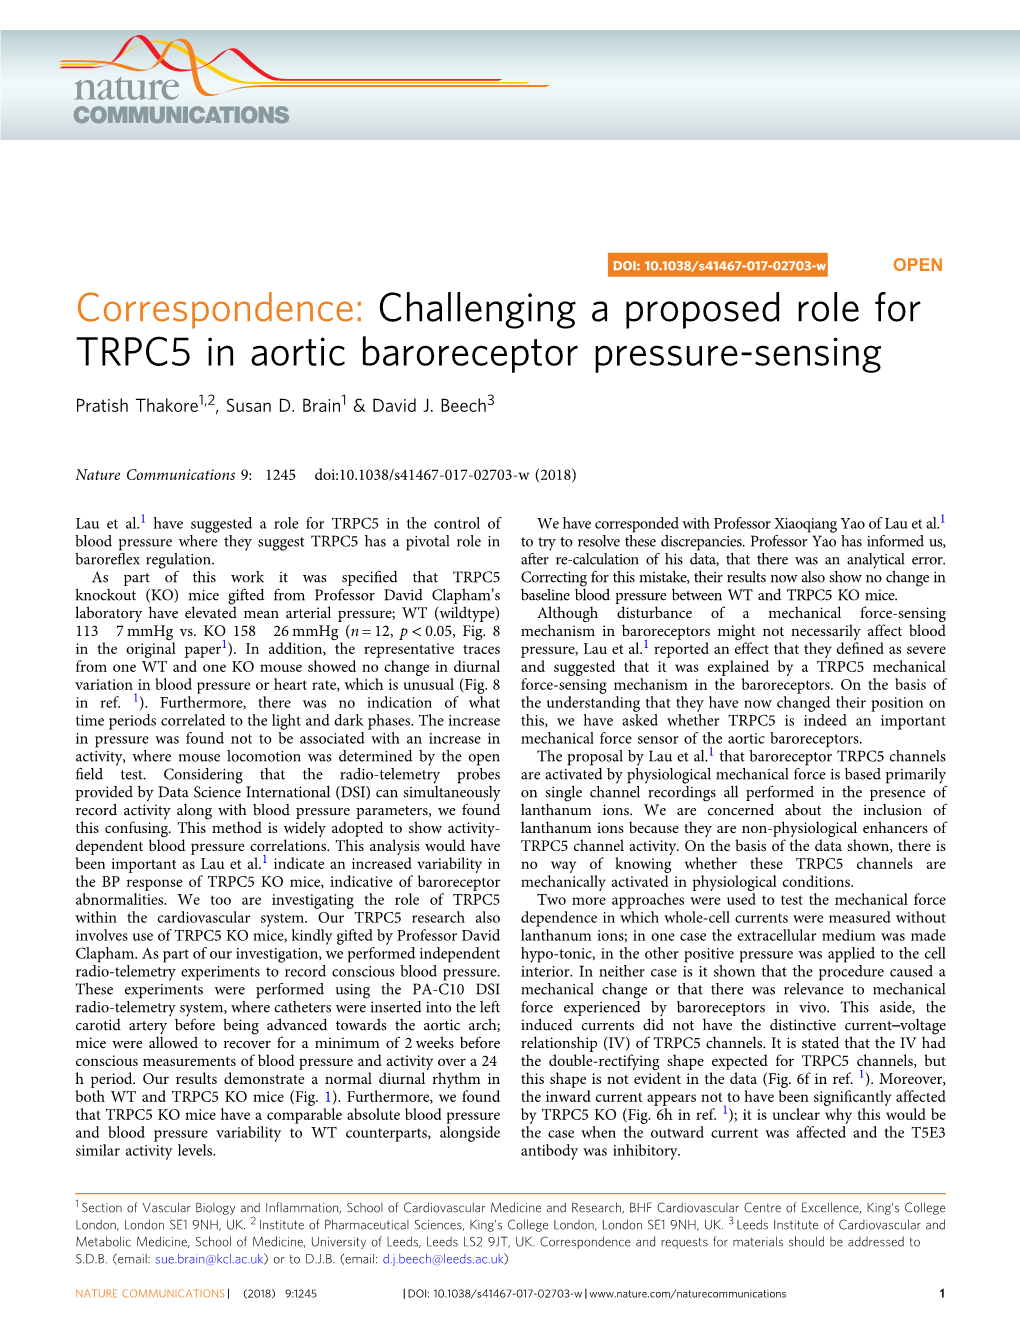 Challenging a Proposed Role for TRPC5 in Aortic Baroreceptor Pressure-Sensing